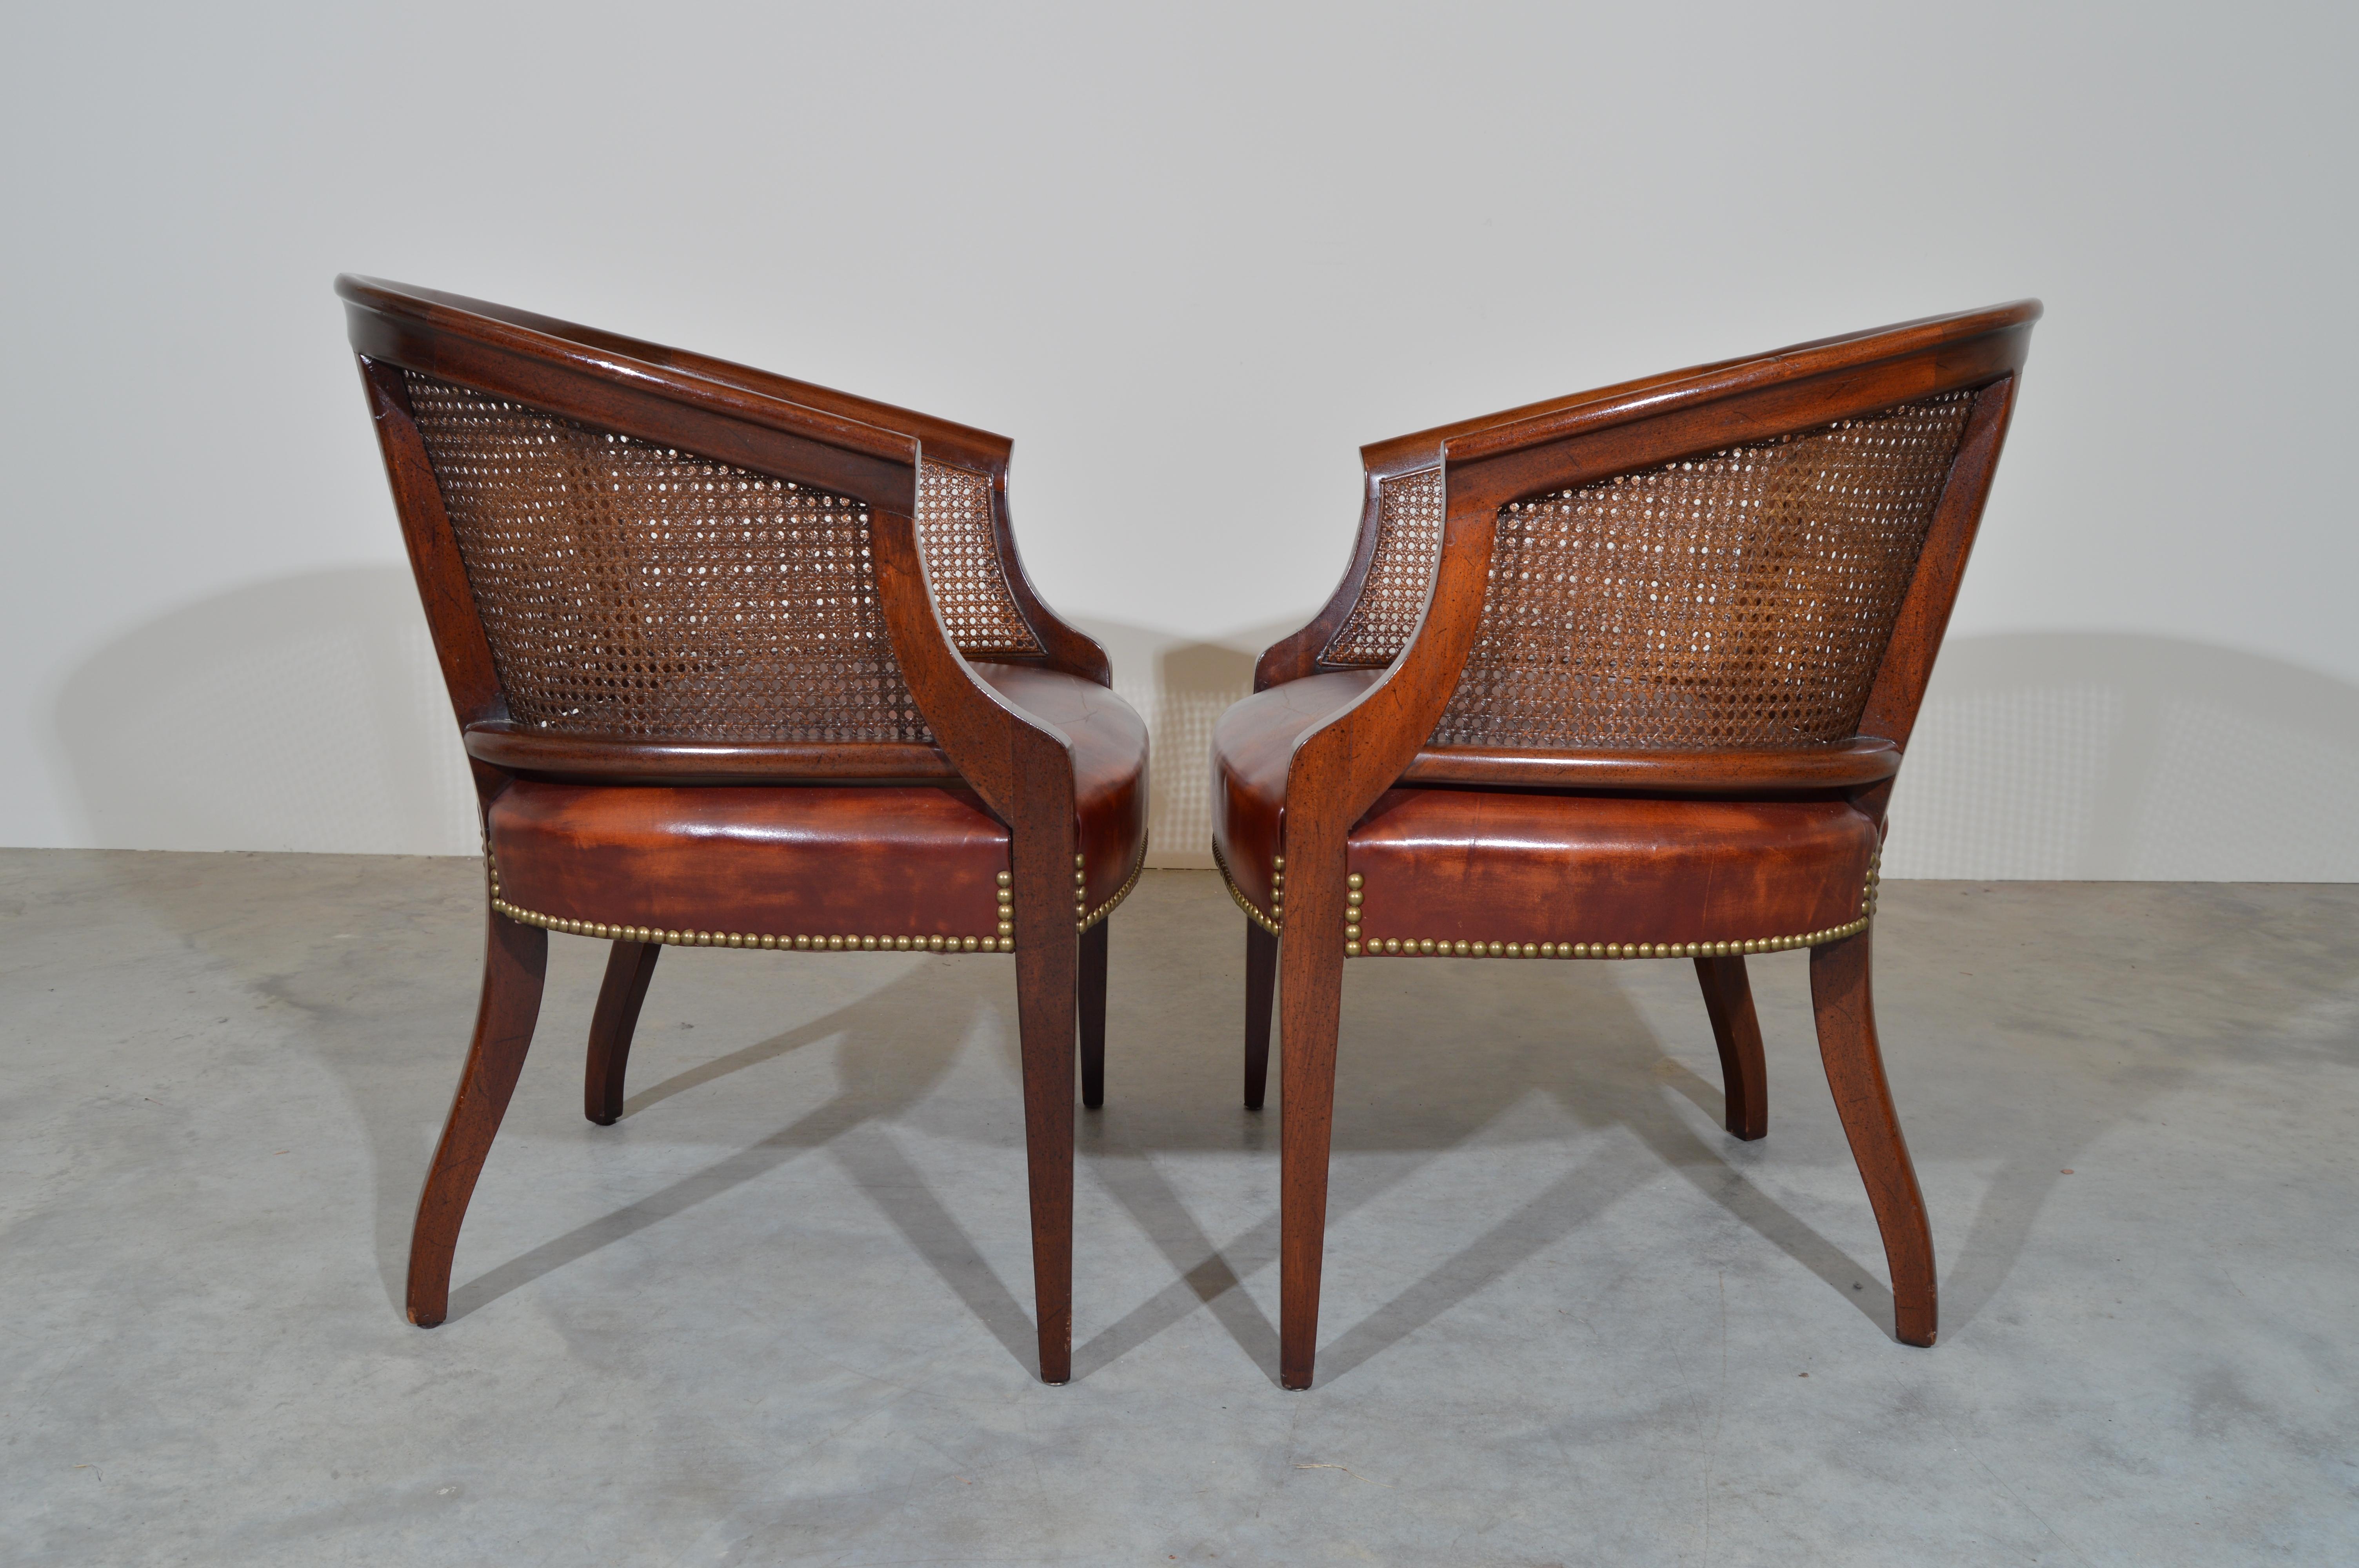 American Pair of Regency Hickory Chair Co. Cane Barrel Back Club Chairs Having Lithe Legs